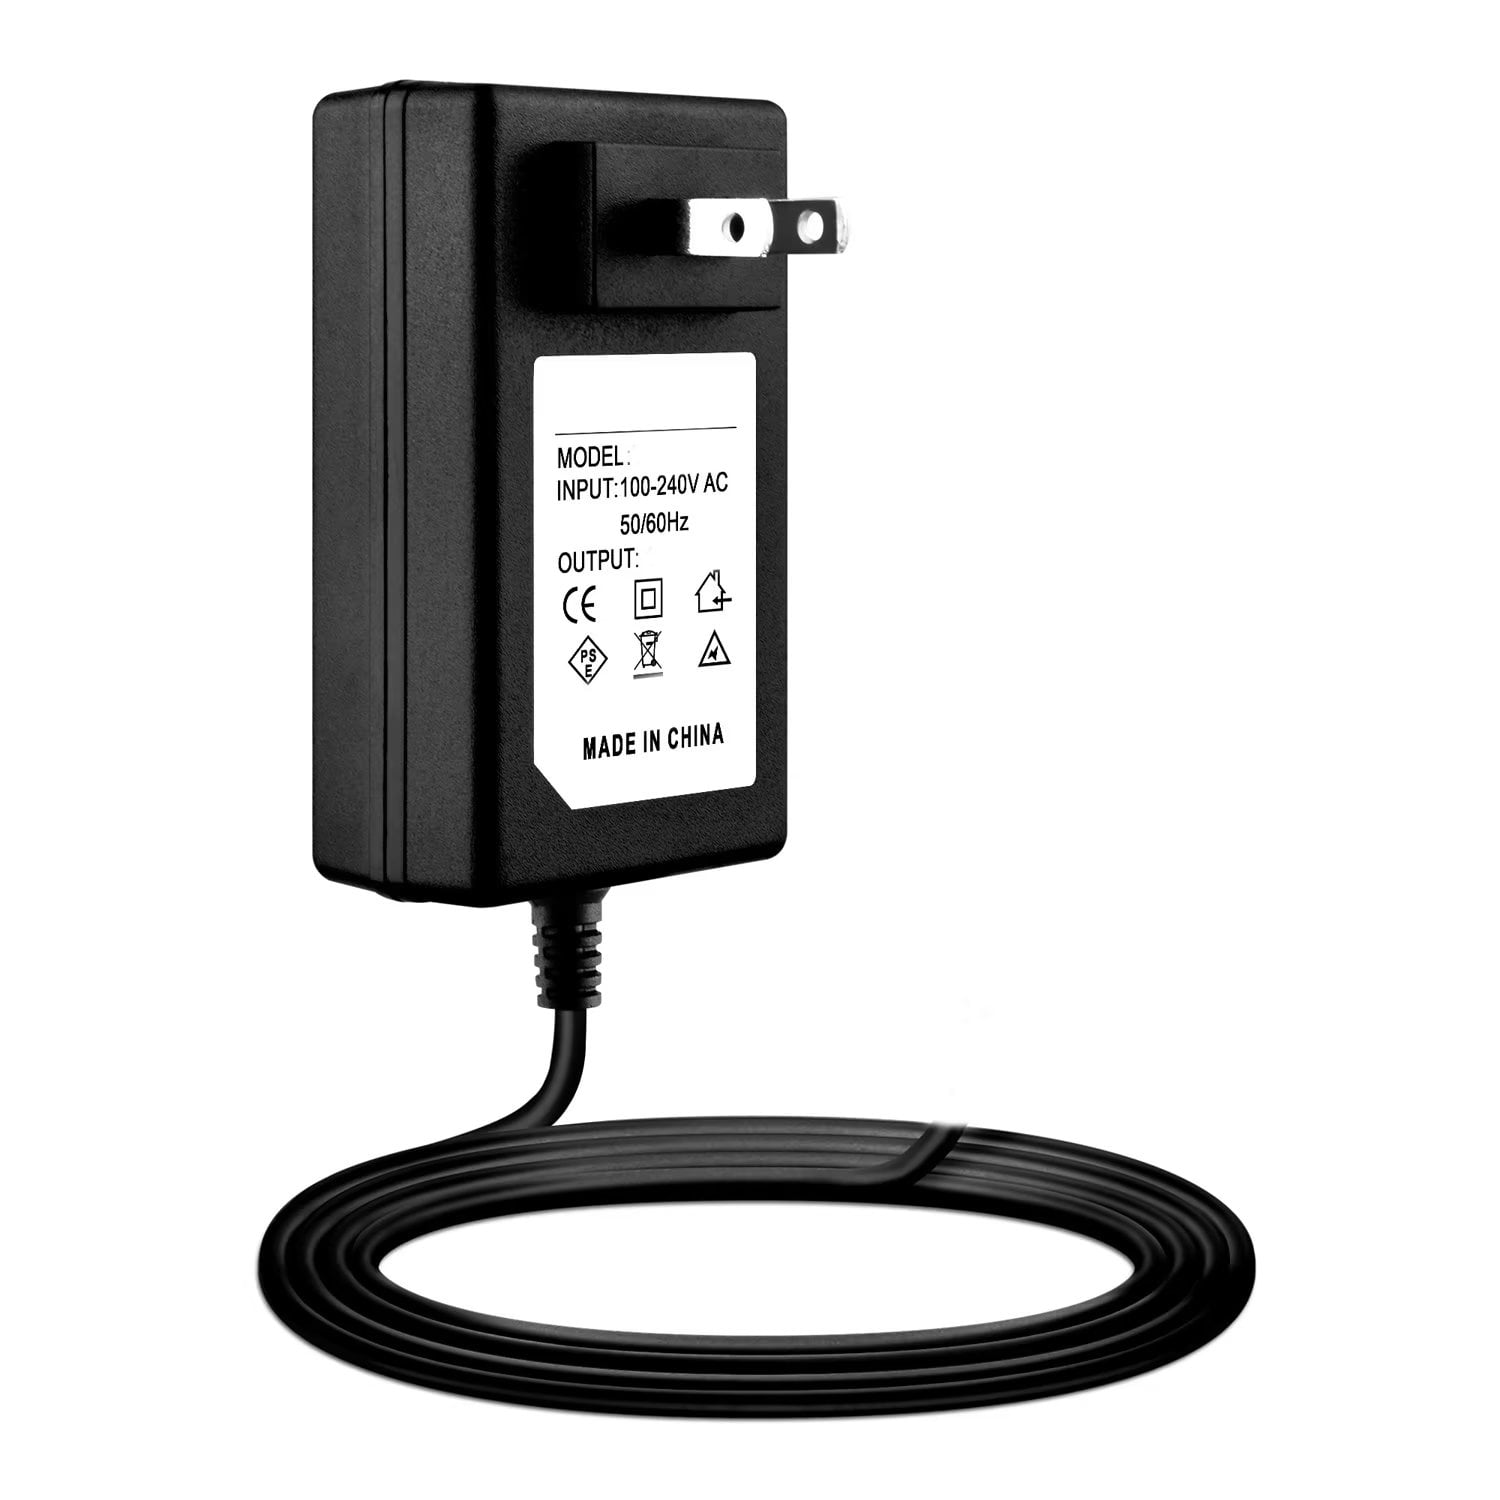 Motorola Single Cup Rapid Charger HTN9000C for Ht750 Ht1250 for sale online 